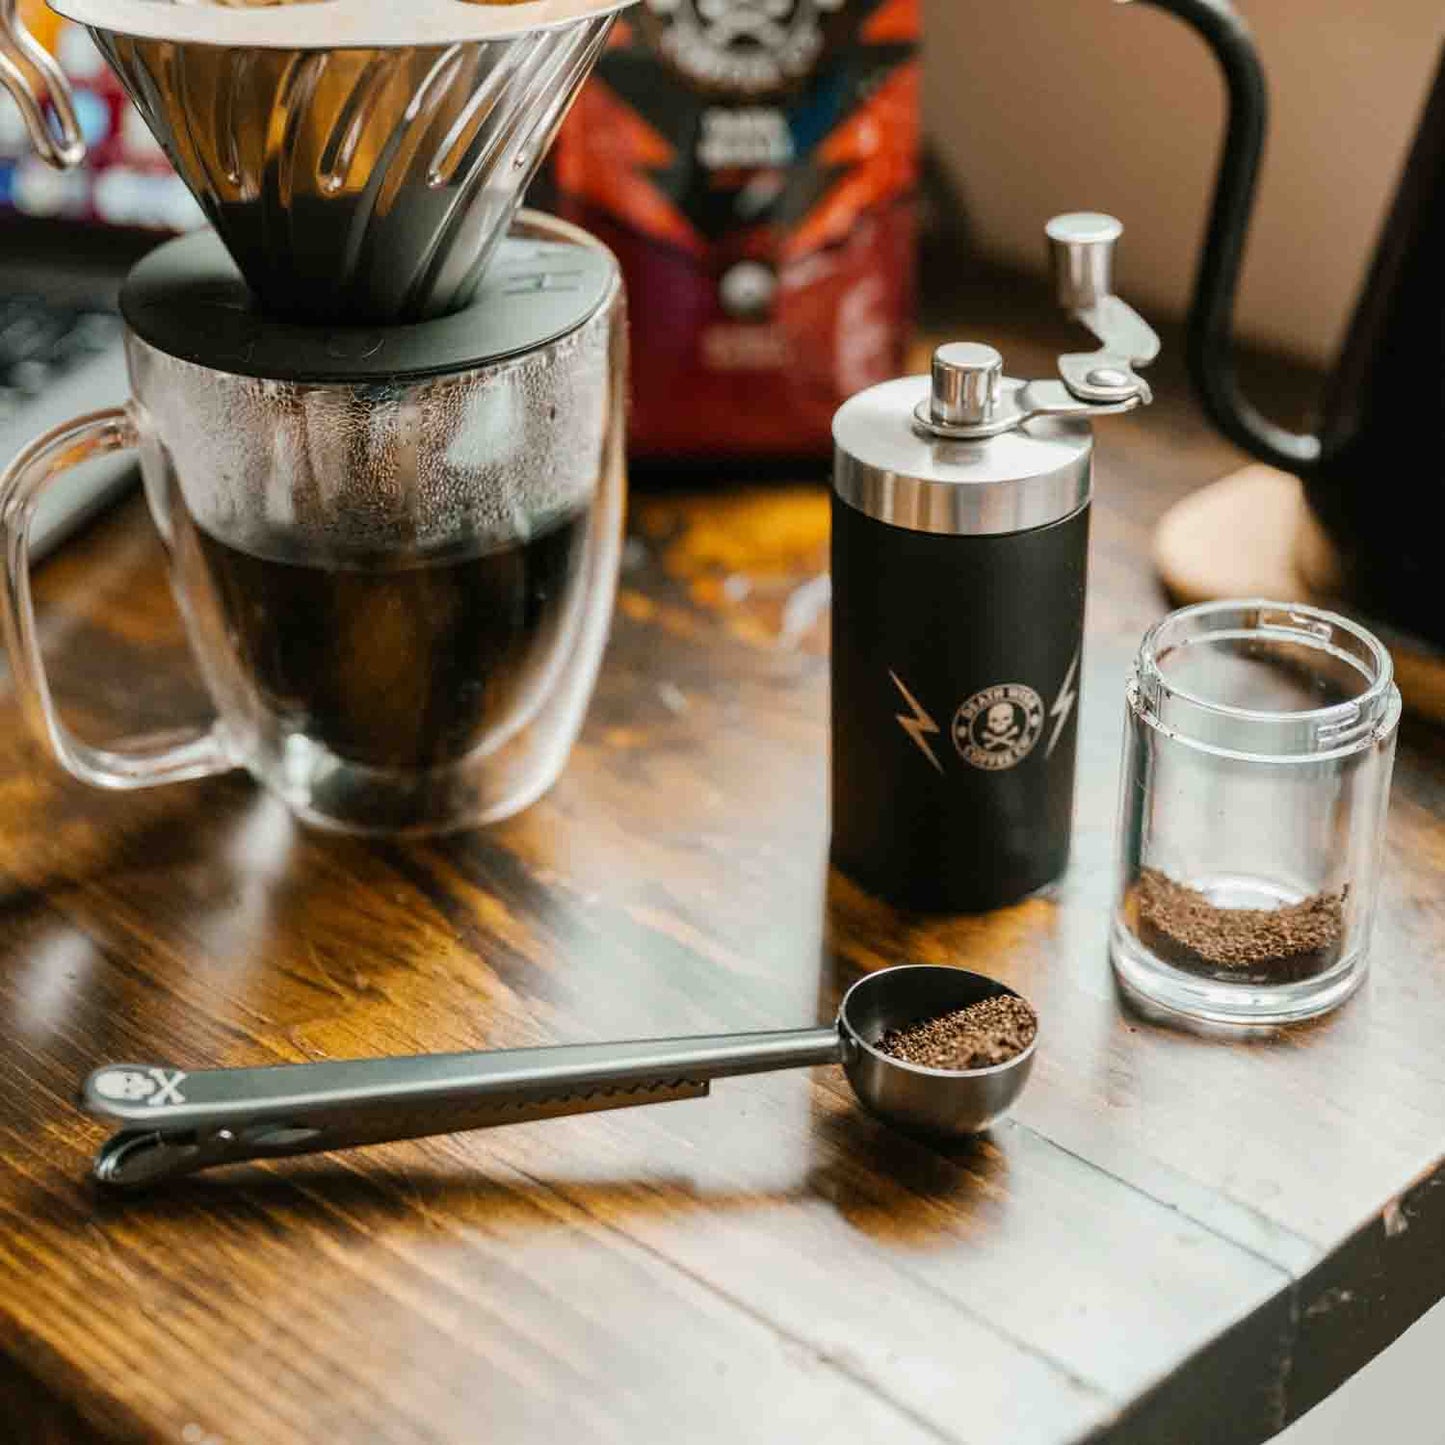 Making coffee with the Death Wish Coffee Hand Grinder, Scoop & Hario Coffee Dripper.